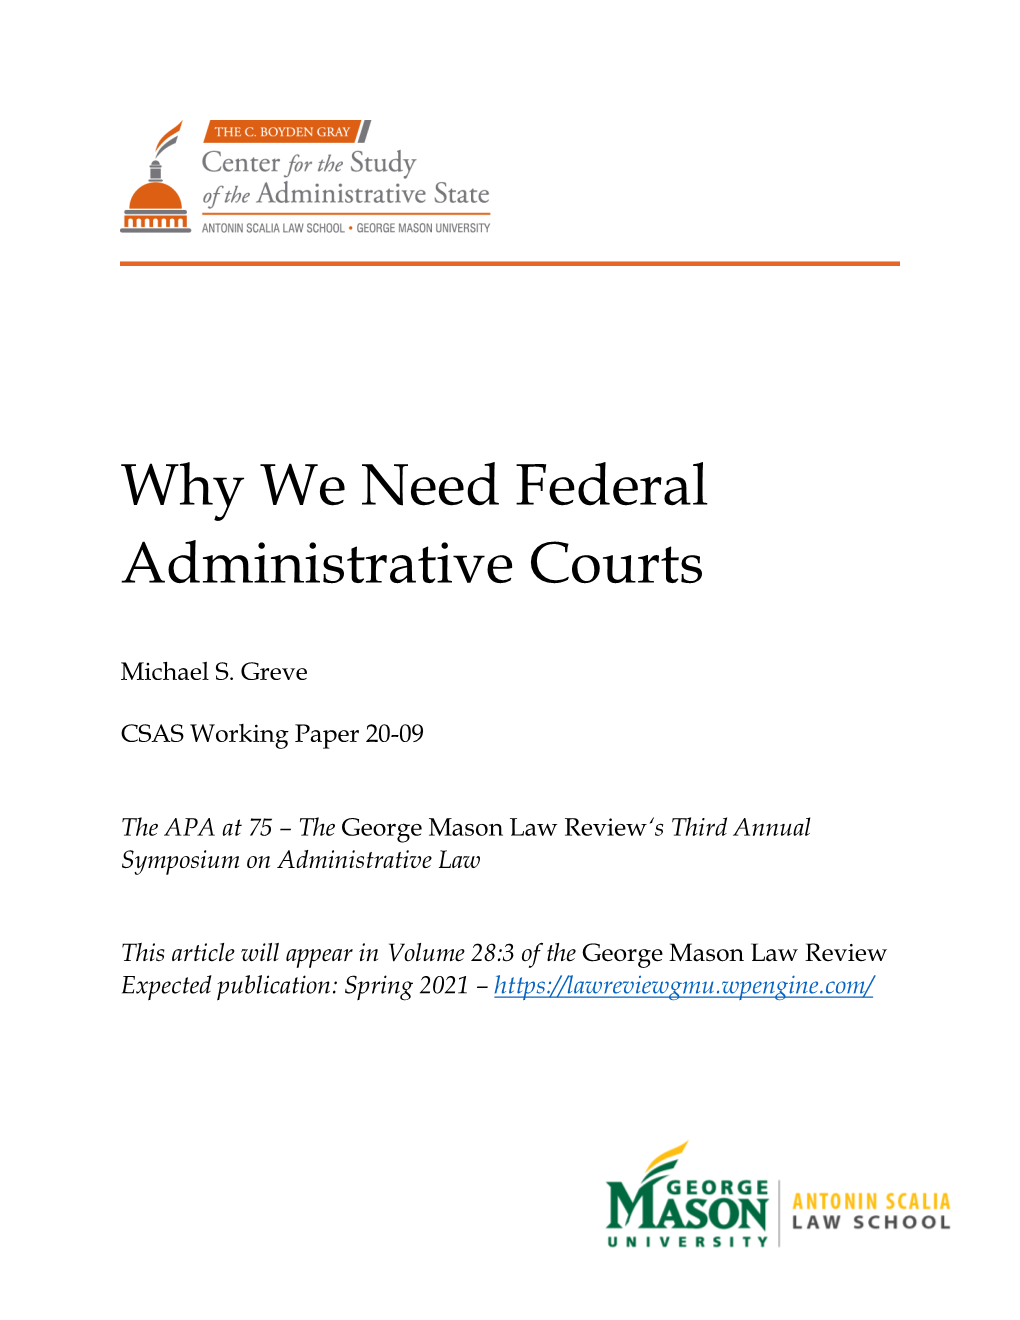 Why We Need Federal Administrative Courts